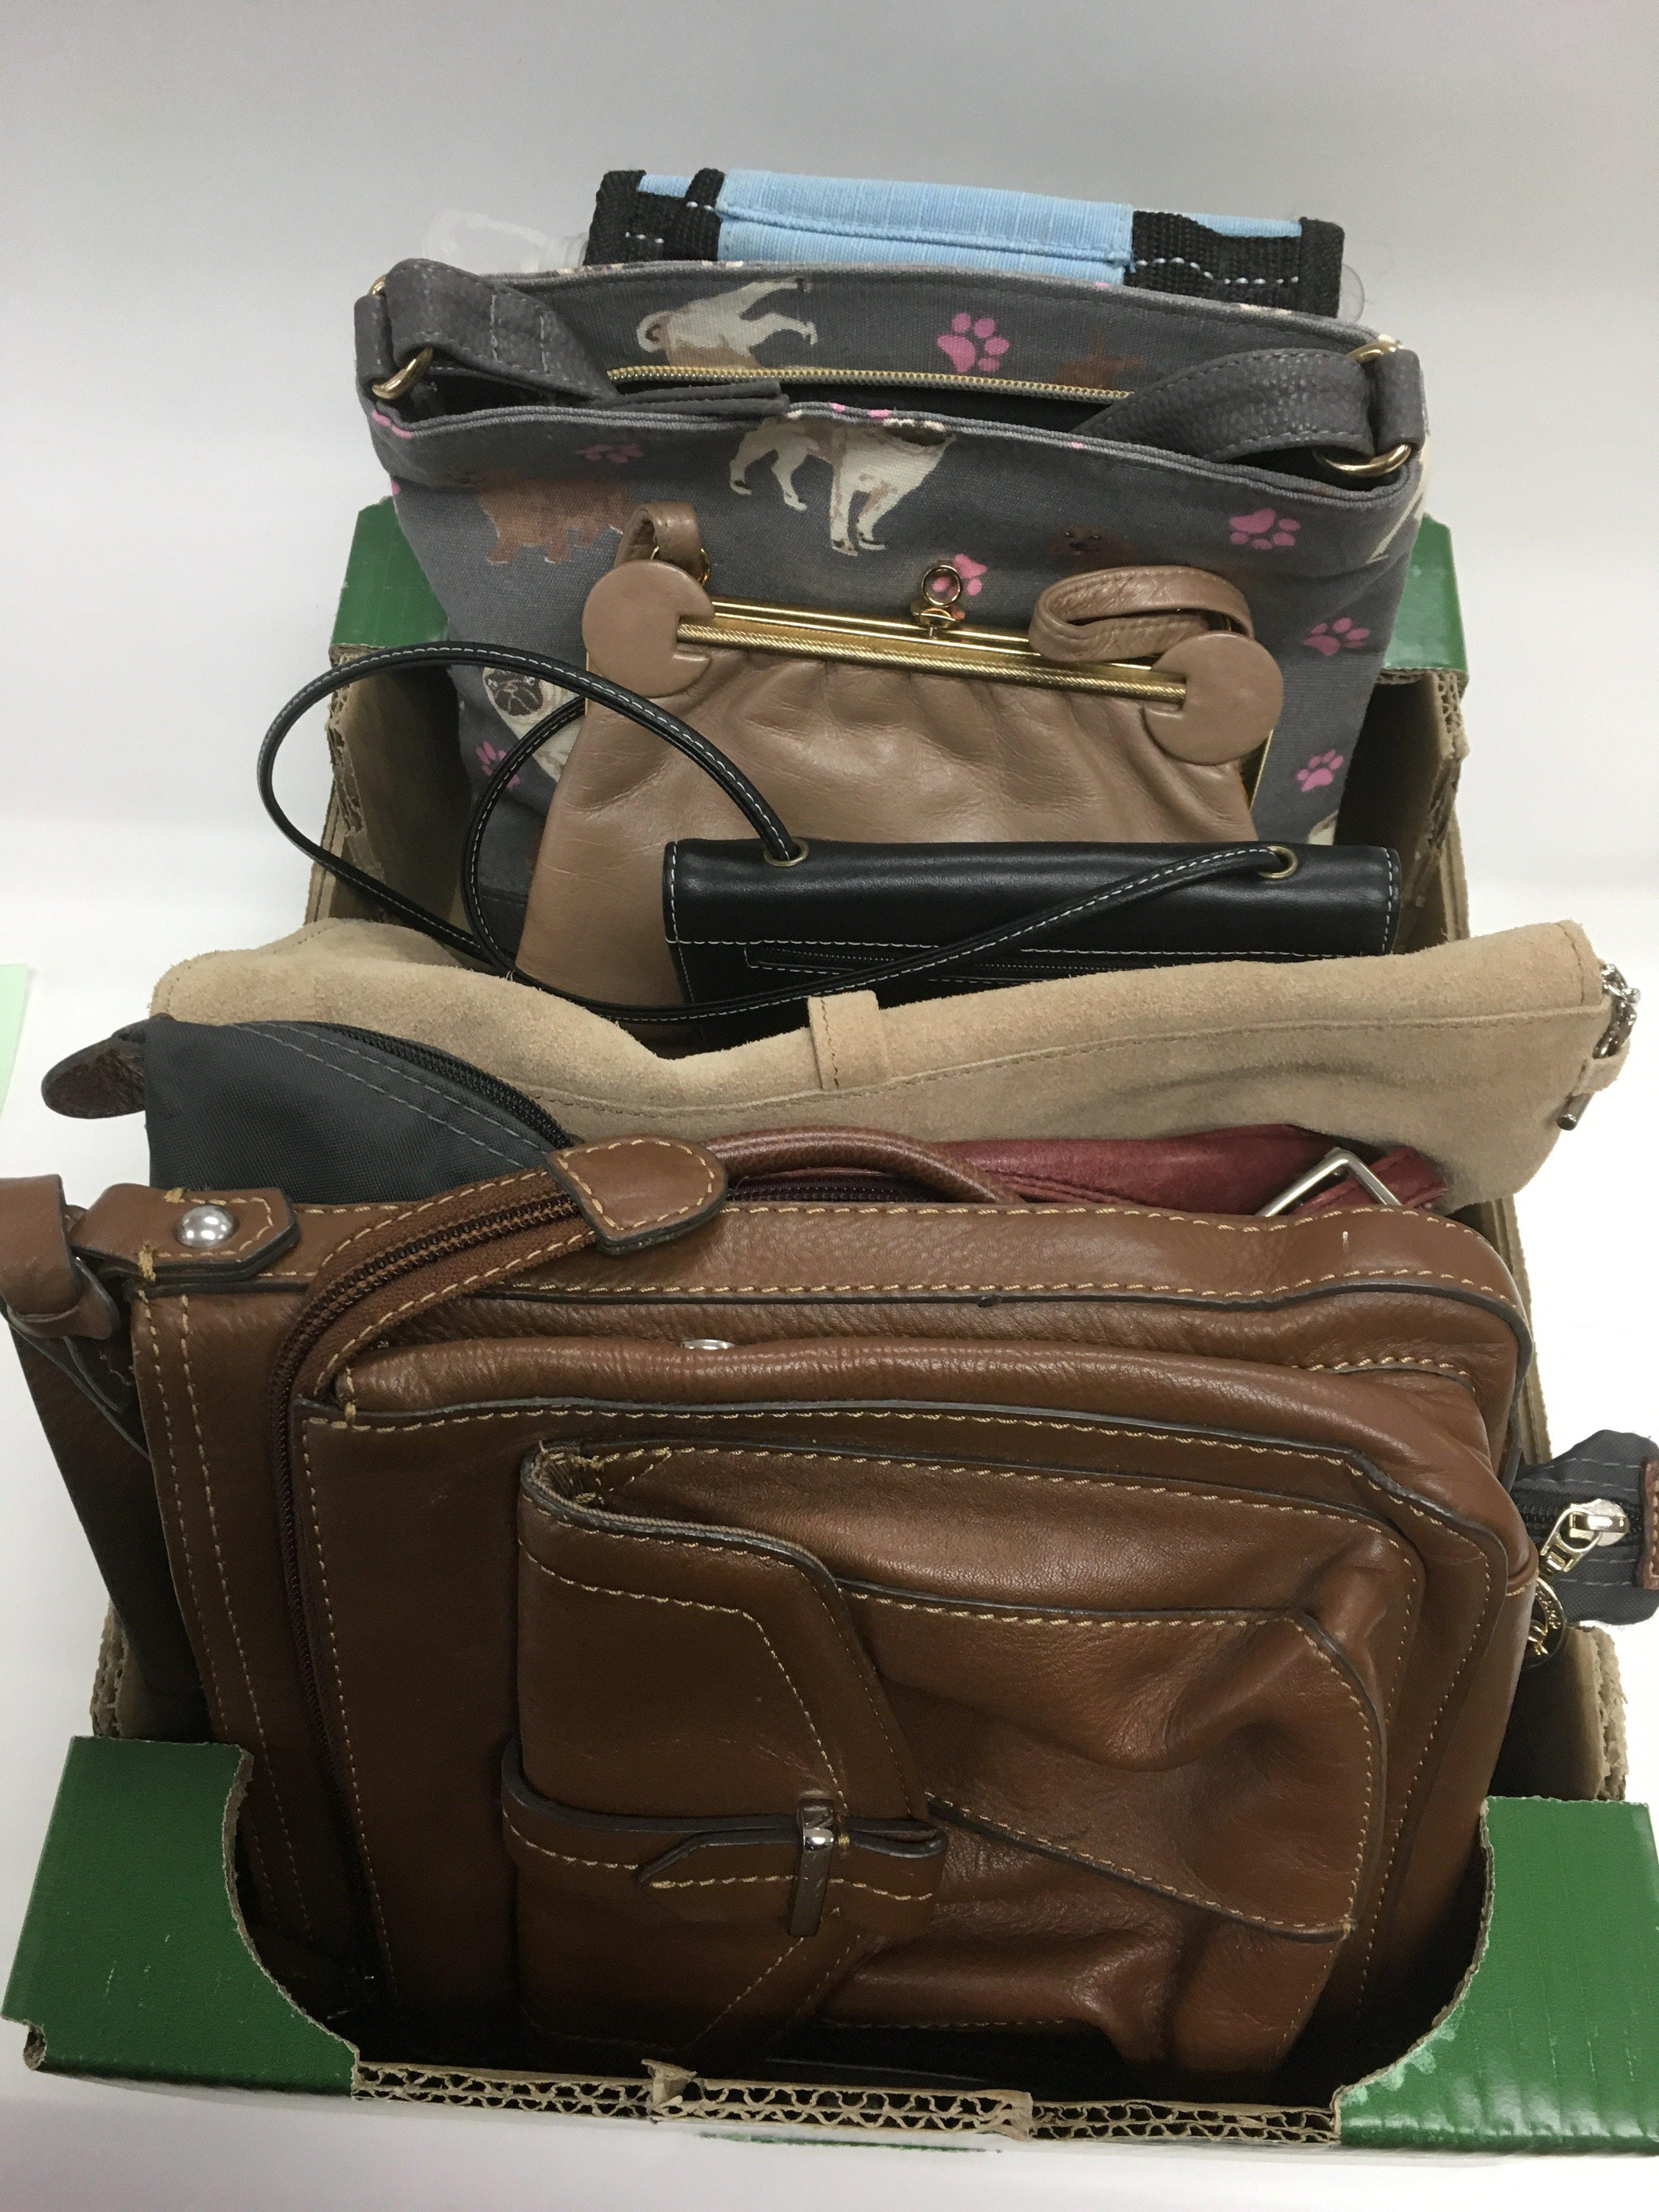 A collection of ladies bags and purses.